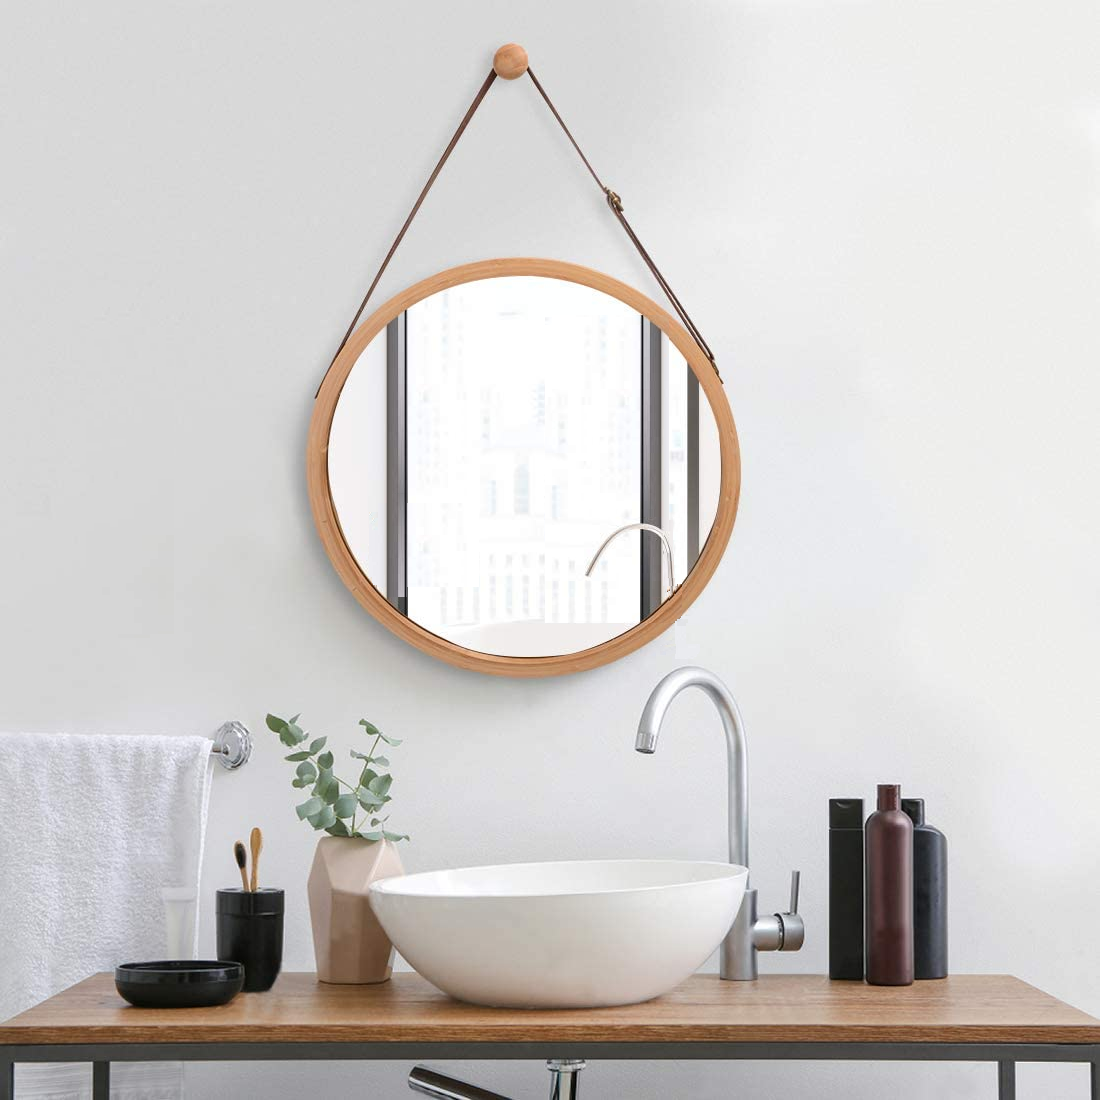 Hanging Round Wall Mirror - Solid Bamboo Frame